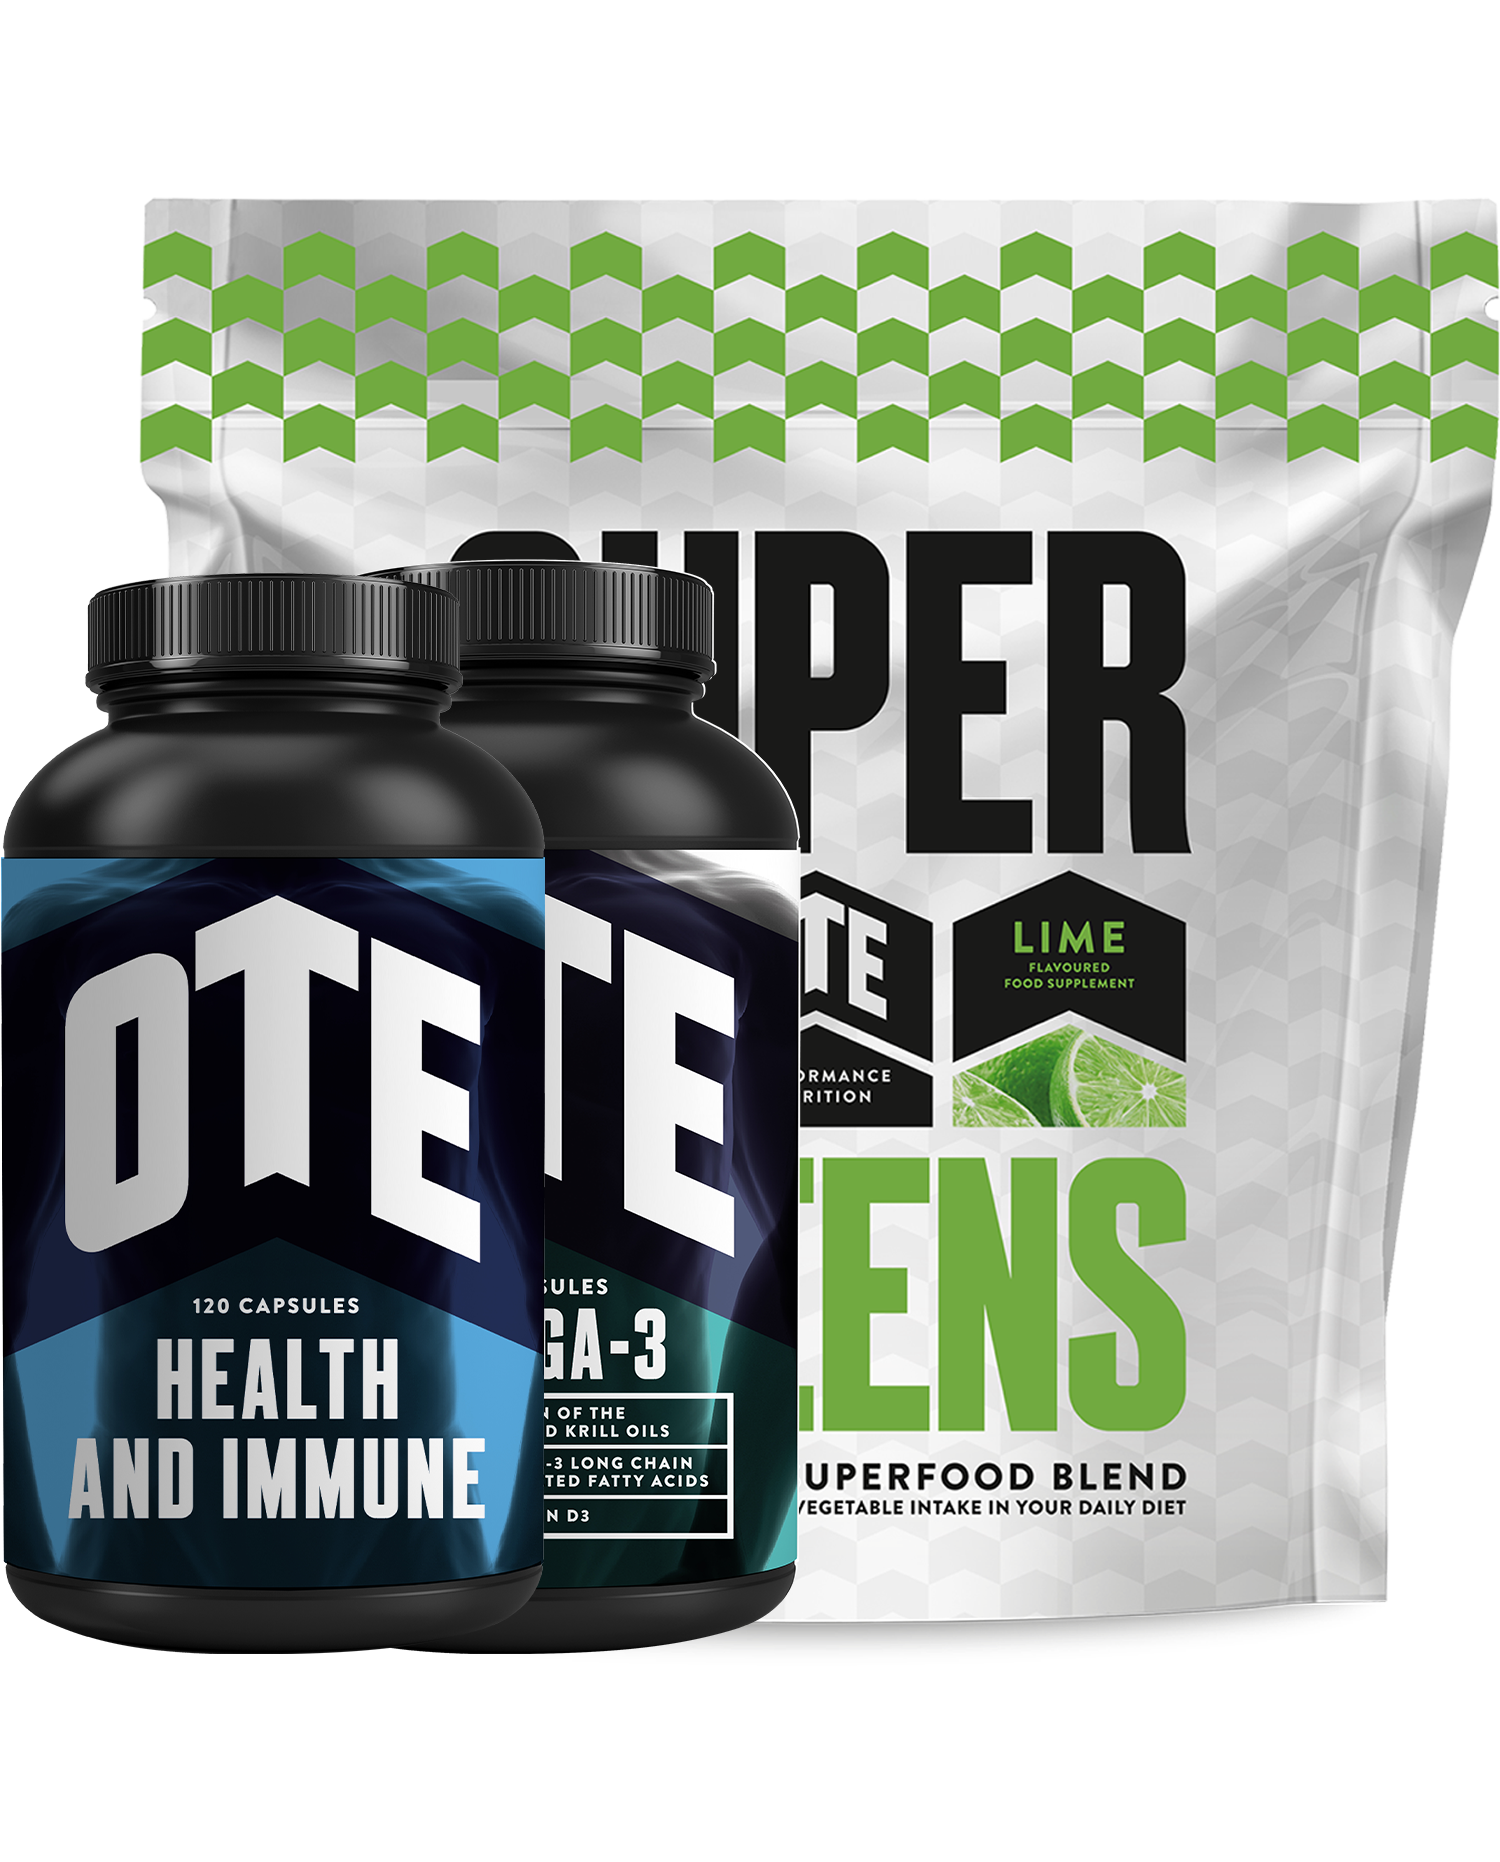 Monthly supplement pack